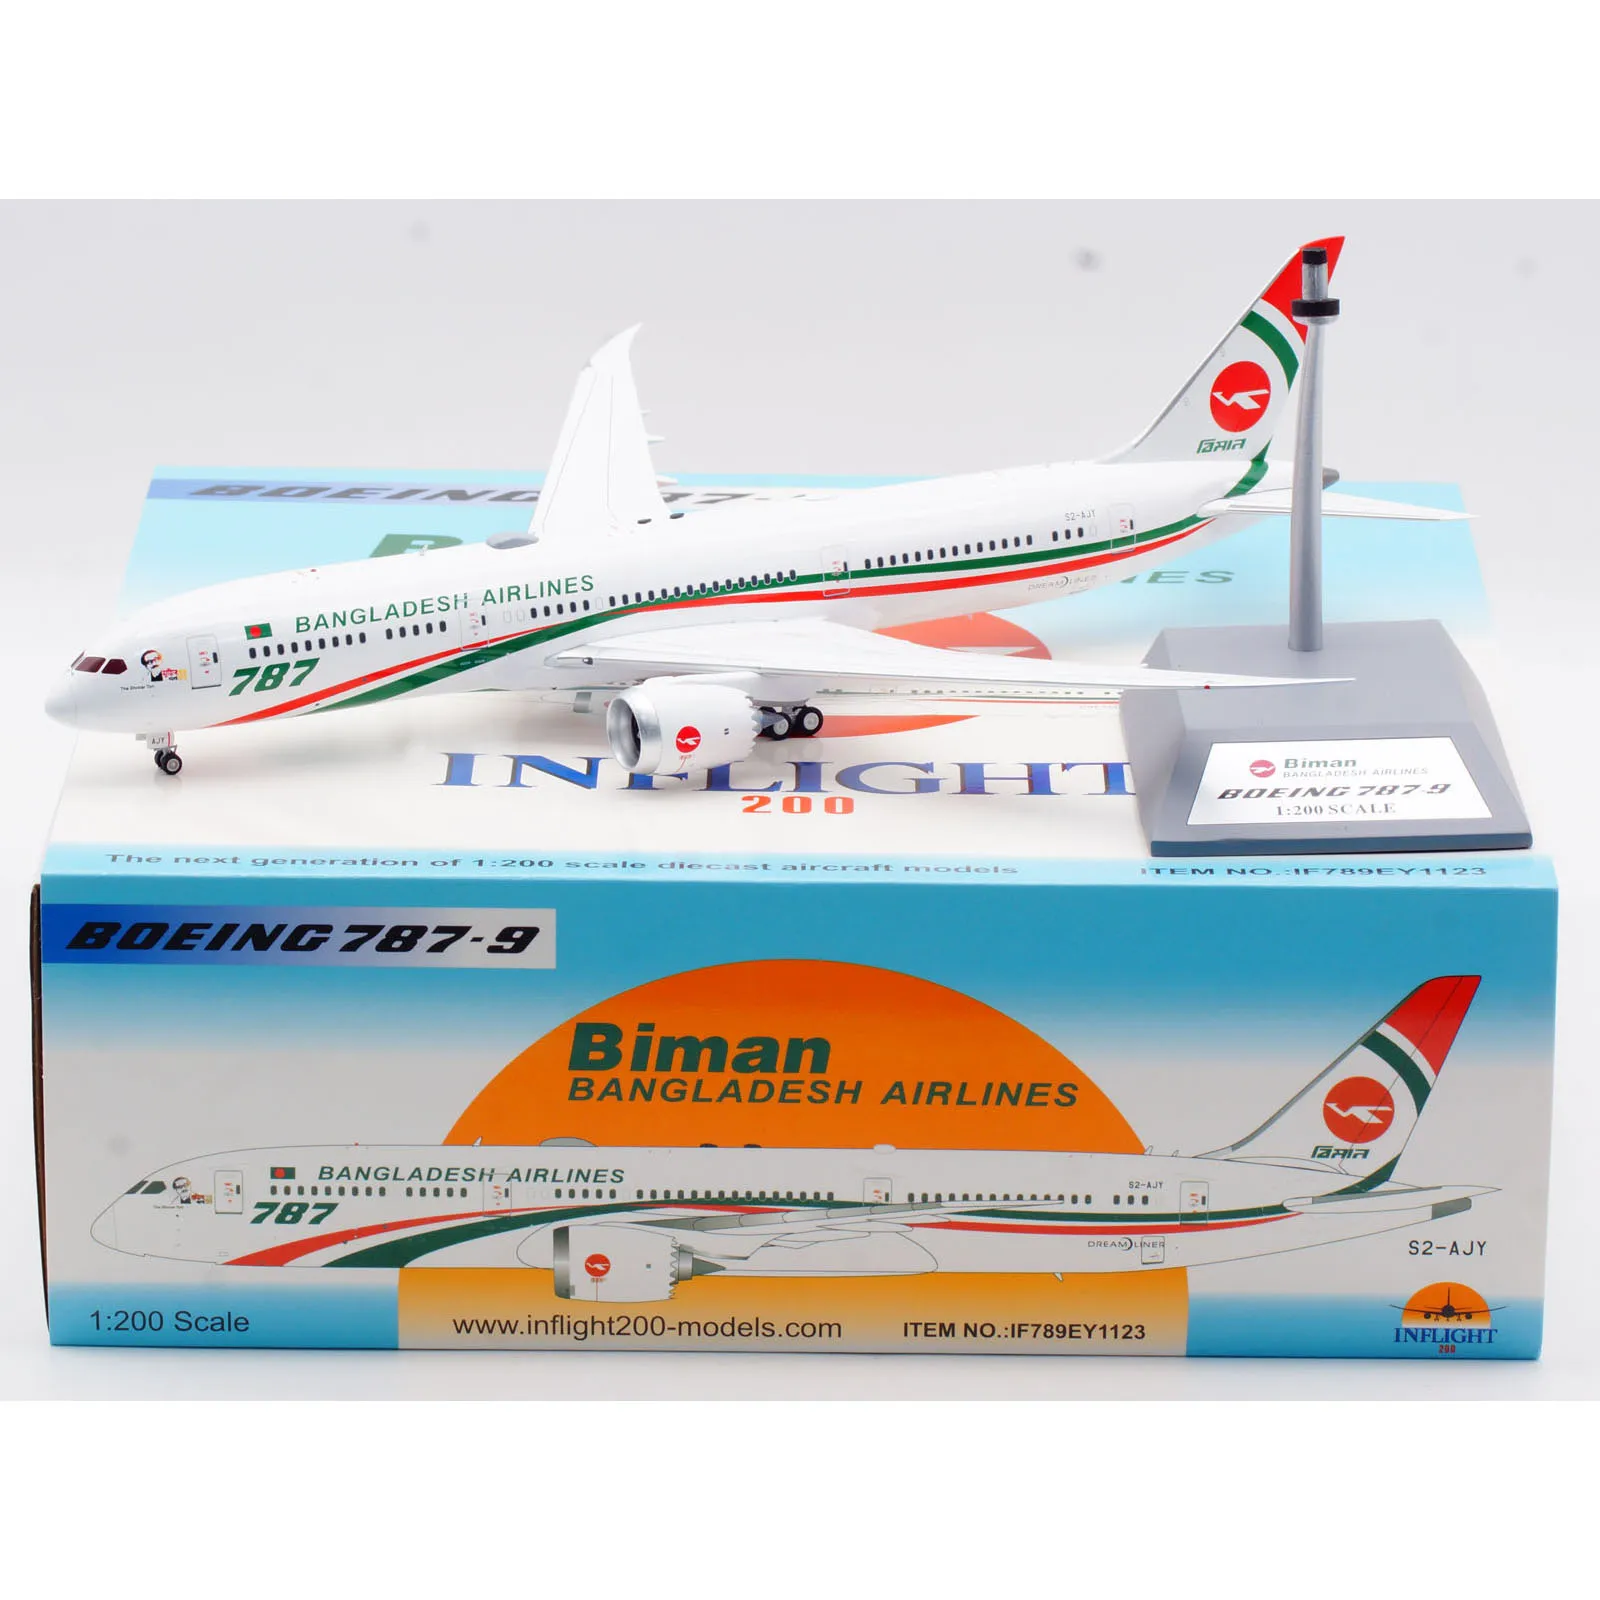 INFLIGHT Airlines Boeing B787-9 Diecast Aircraft Model S2-AJY, Alloy Collectible Plane Gift, B789EY1123, 1:200, Biman, Bangladesh Airlines